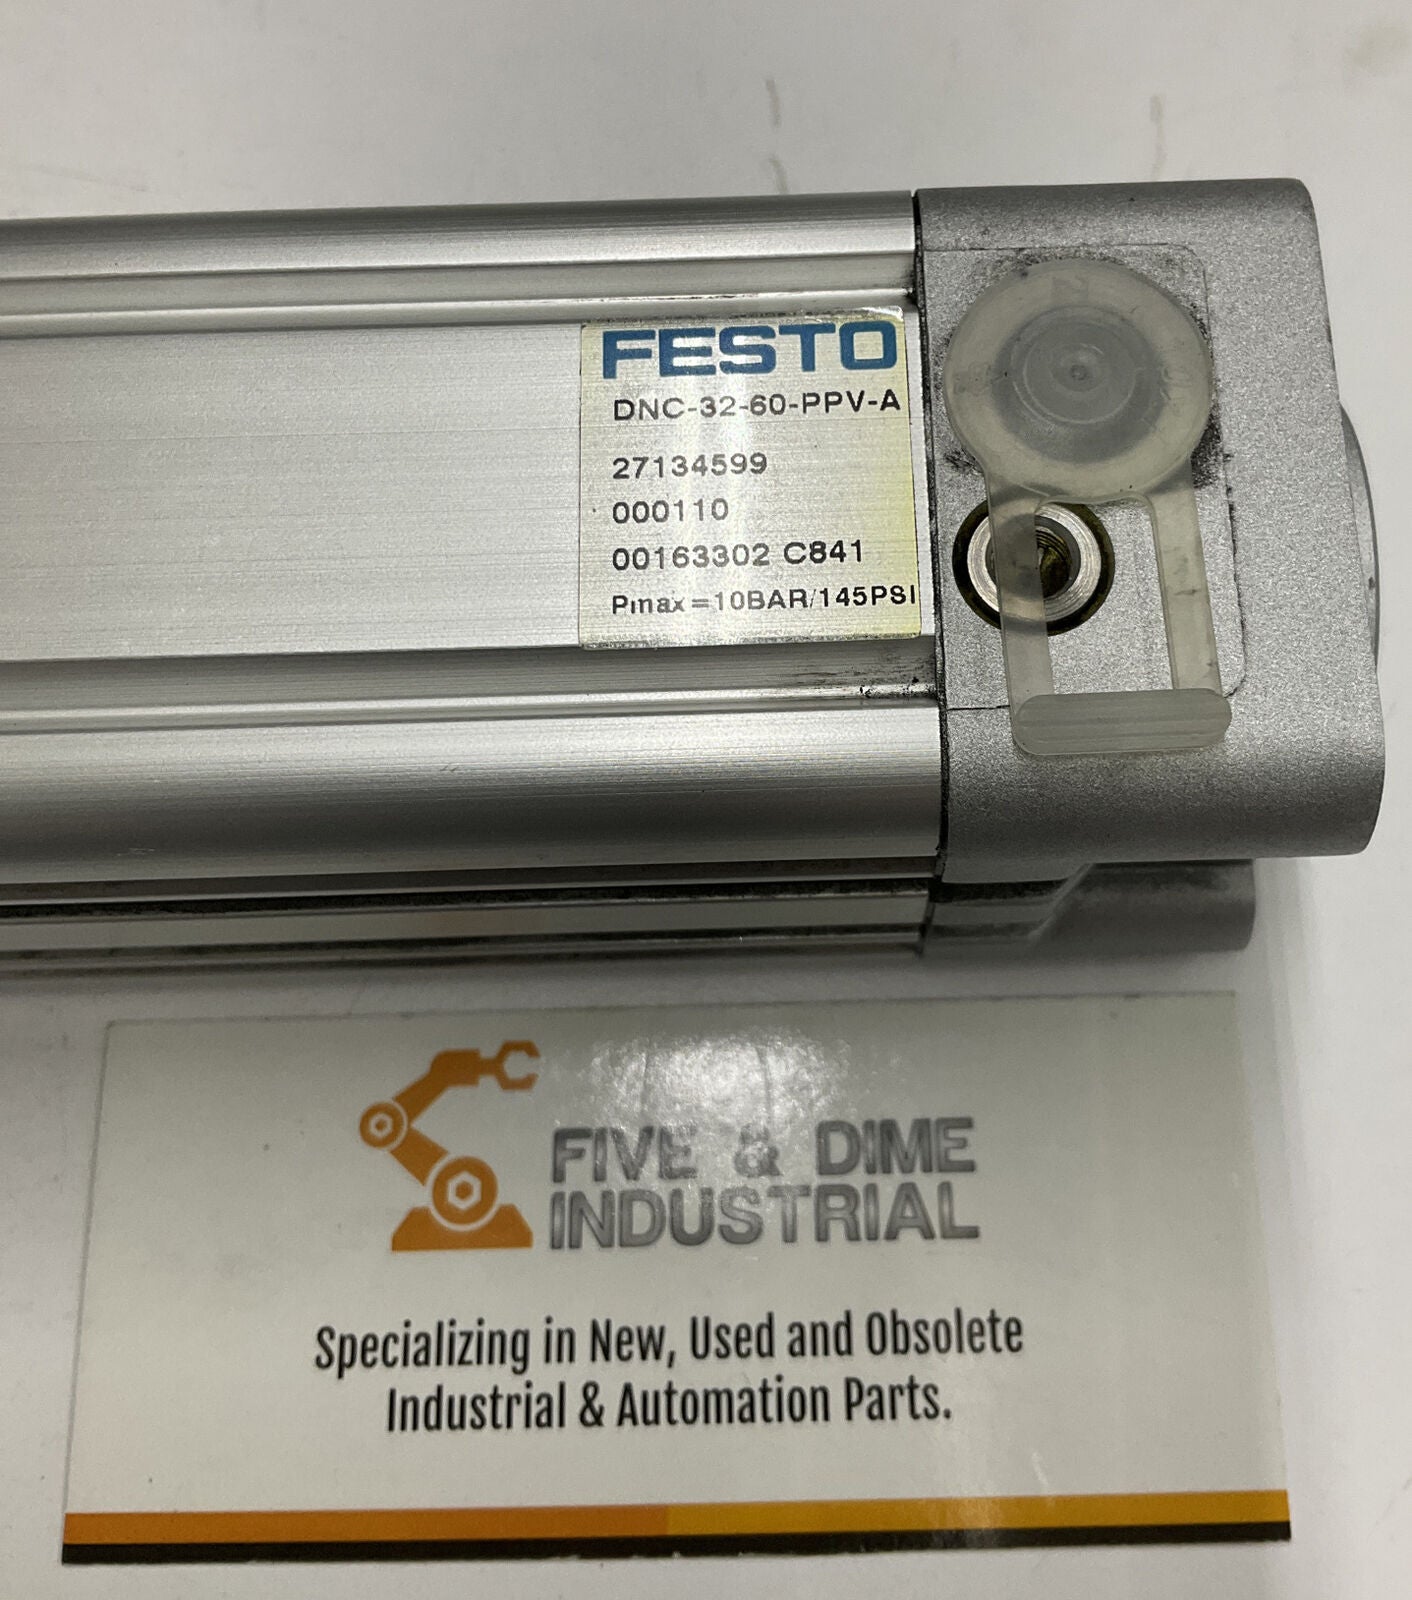 Festo DNC-32-60-PPV-A New Pneumatic Cylinder 145PSI (CL179) - 0